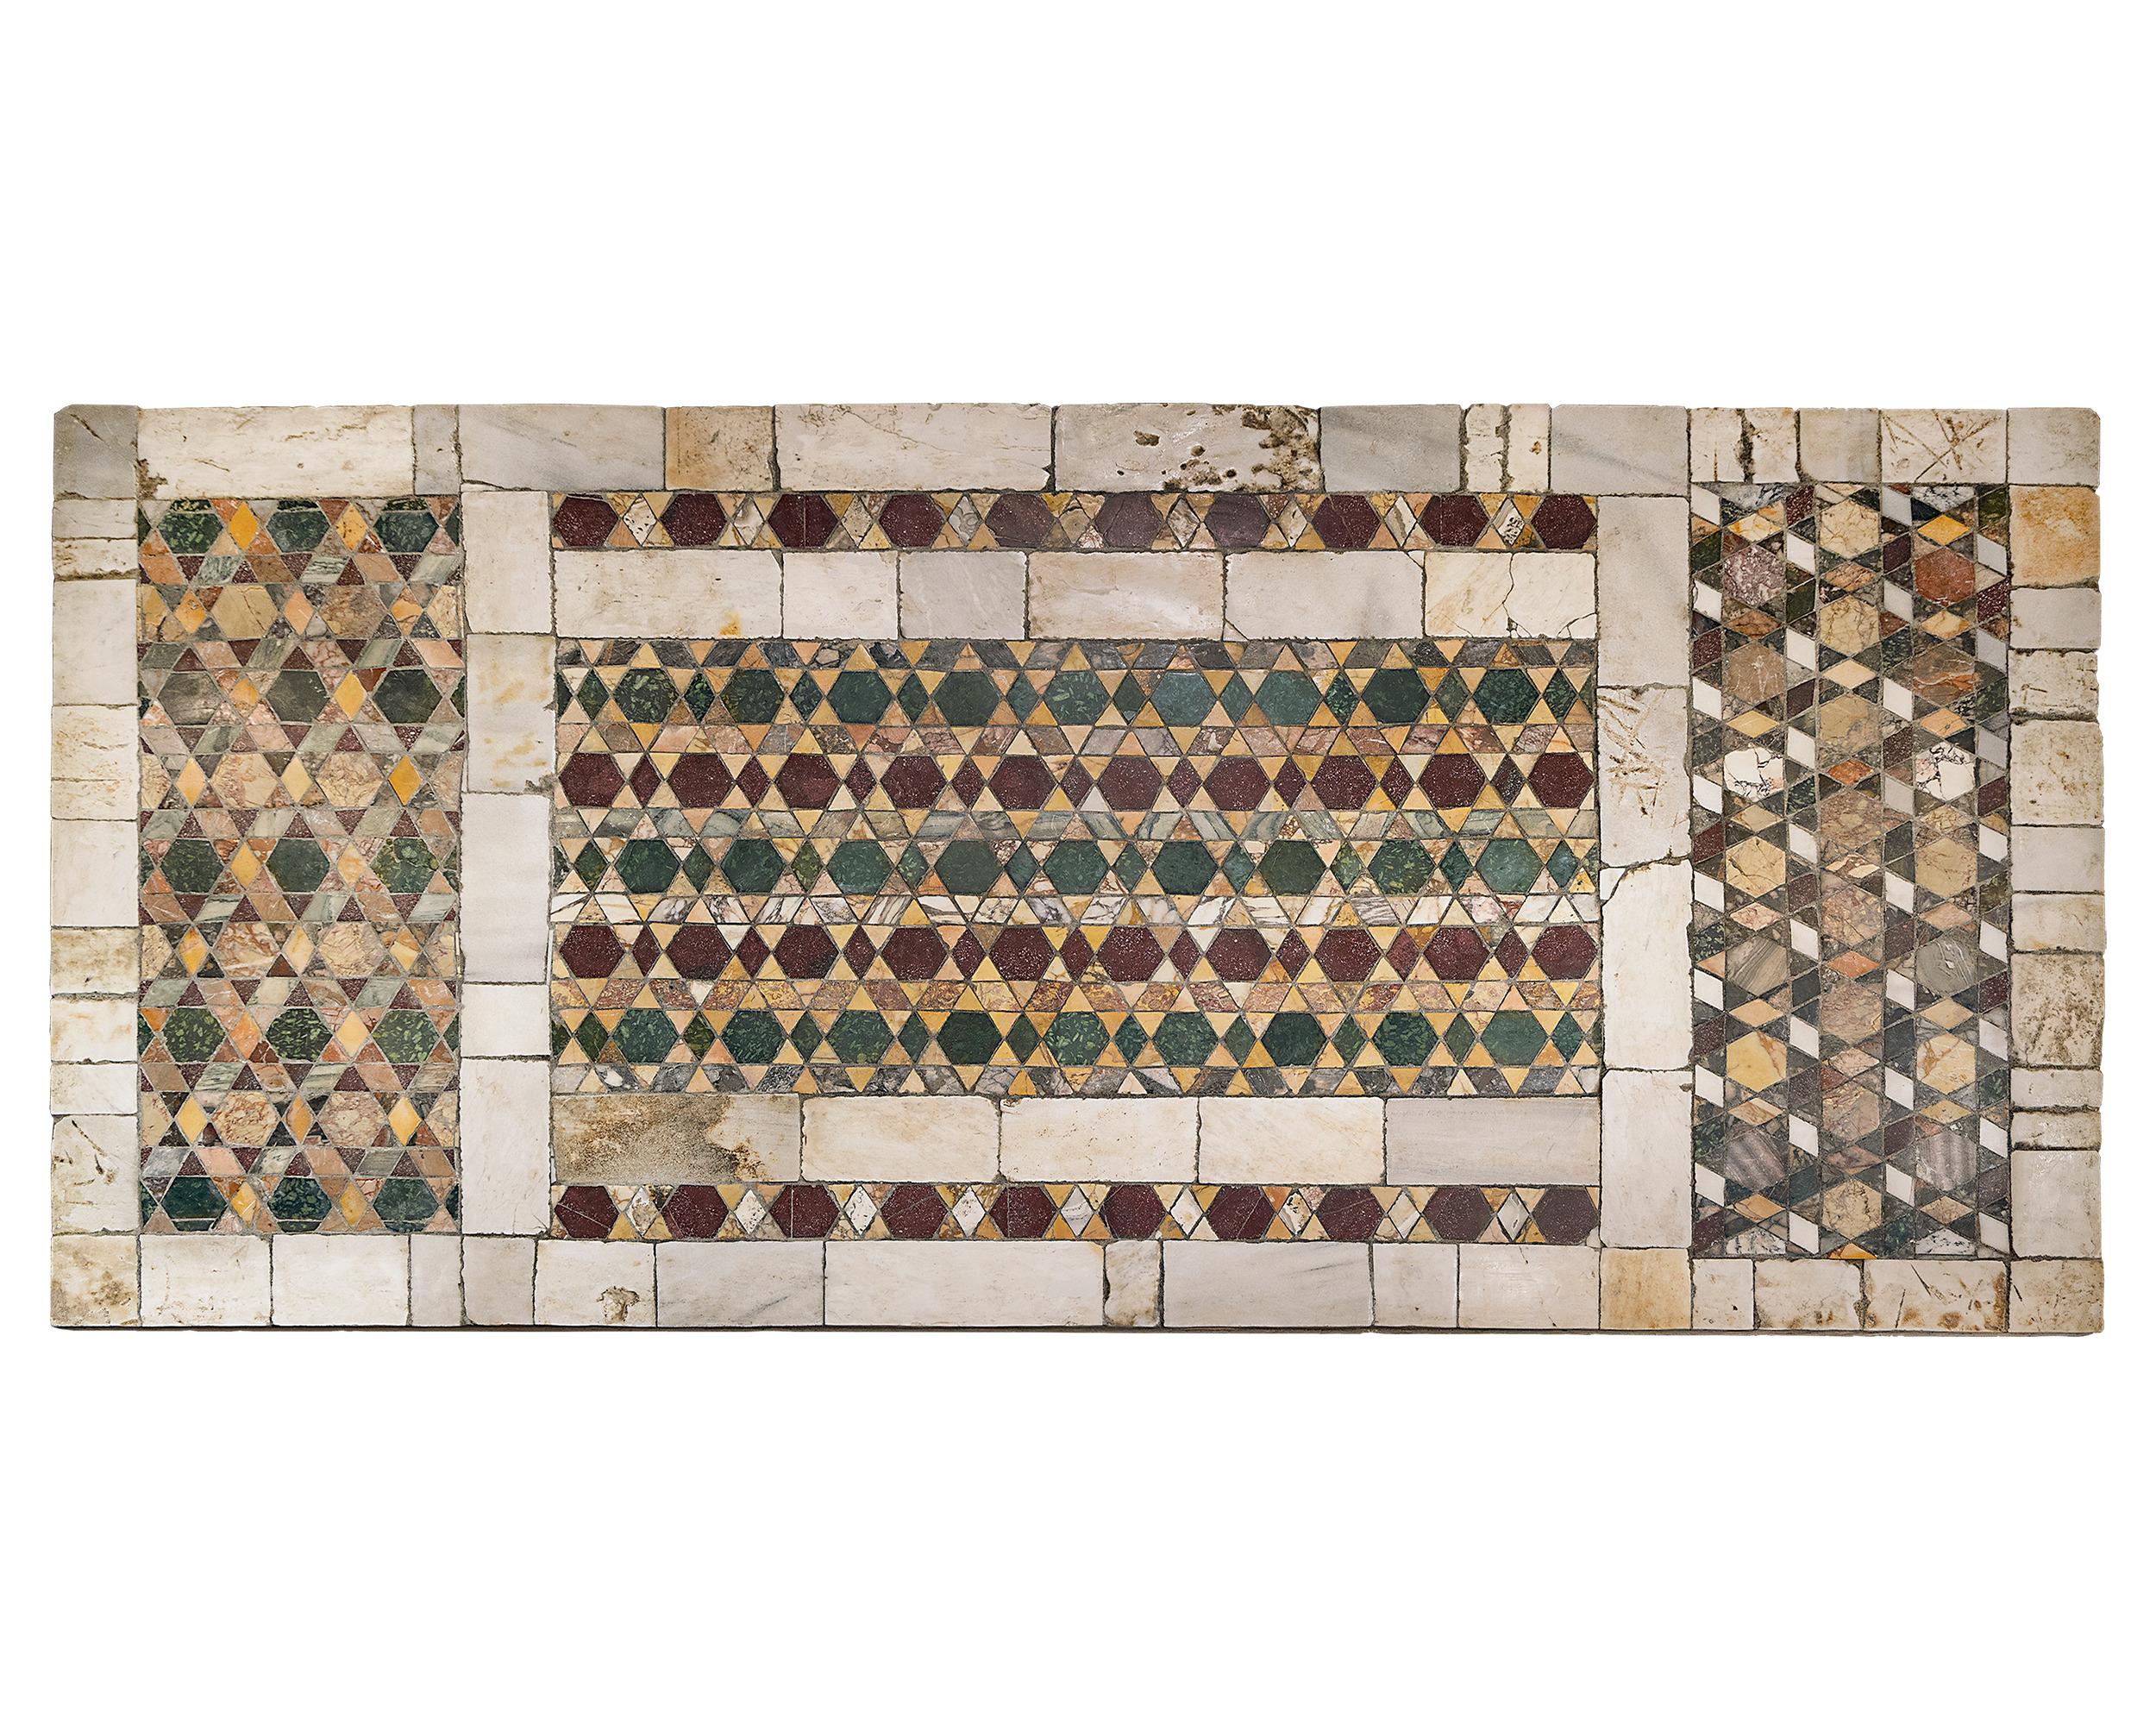 This exceptionally important Roman Empire pavement forming this table's top would have lined the walkways of only the most important buildings. Using a rare and ancient form of pietre dure known opus sectile, each hardstone would have been precisely